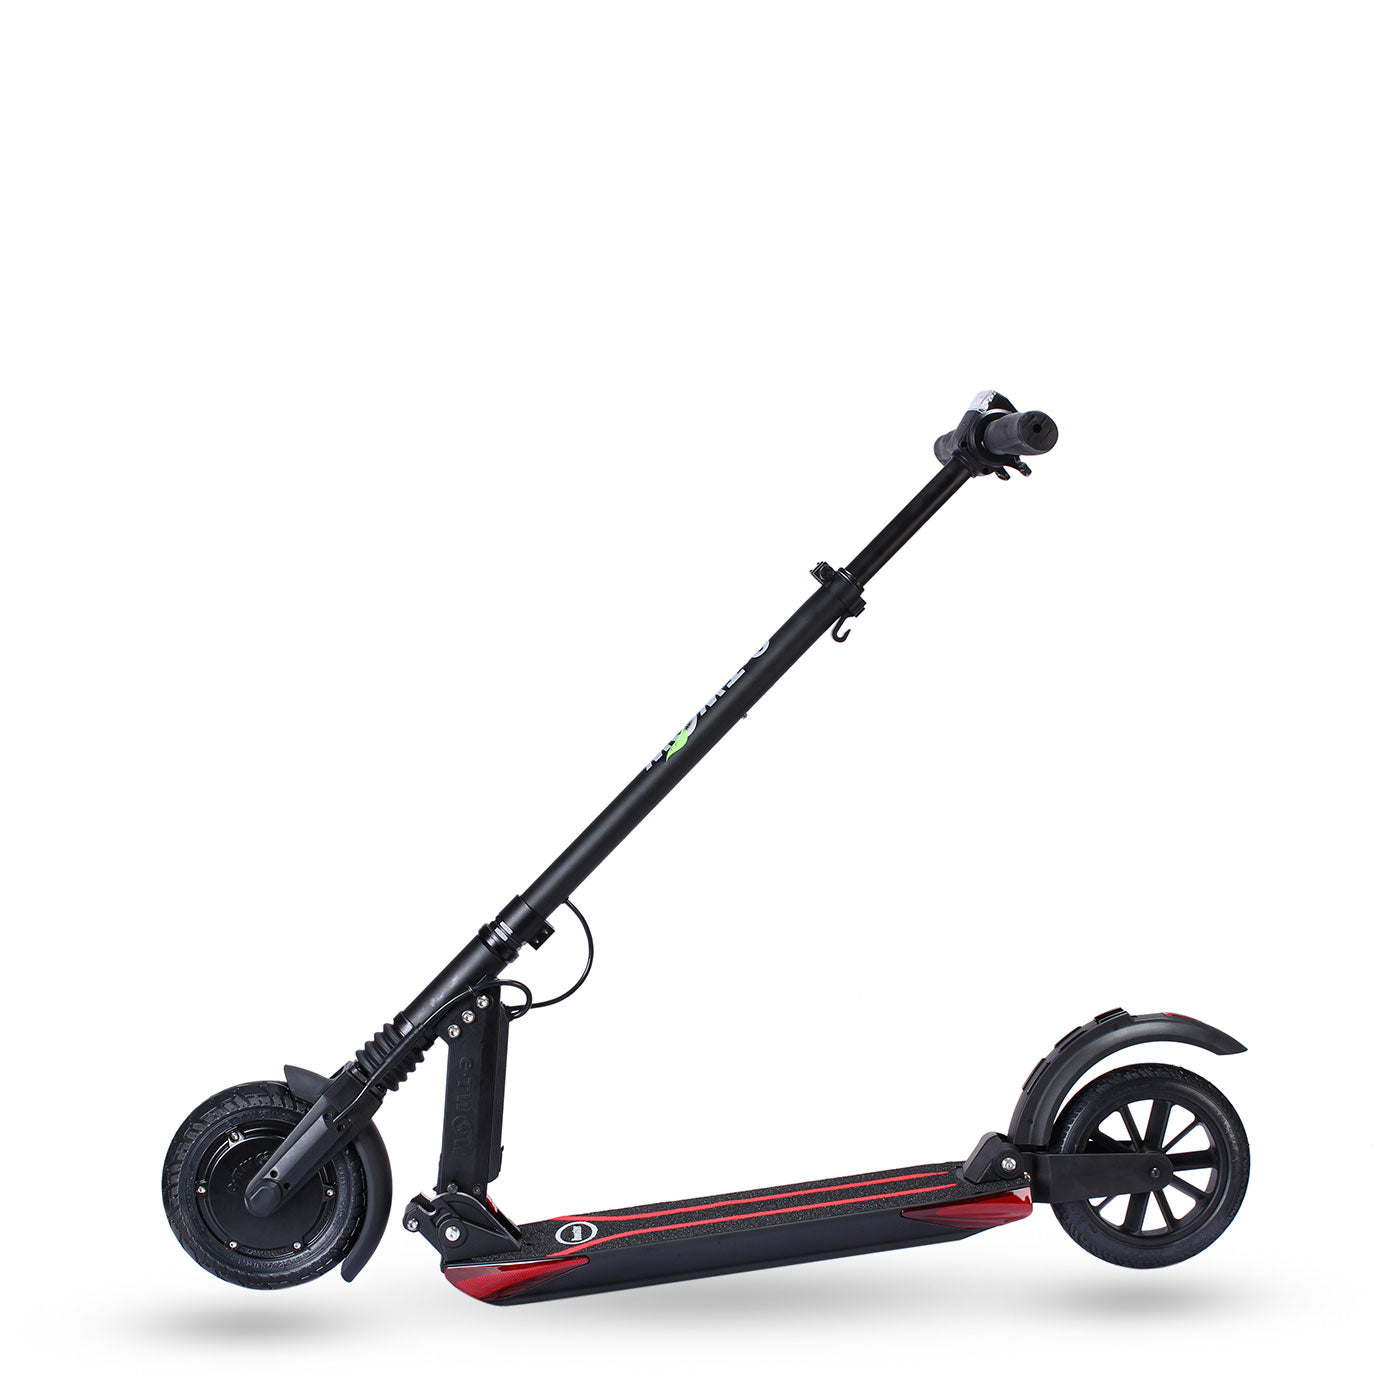 Booster | Buy Electric Scooter and | Electric Vehicle Transportation - E-TWOW - Premium Electric Scooters